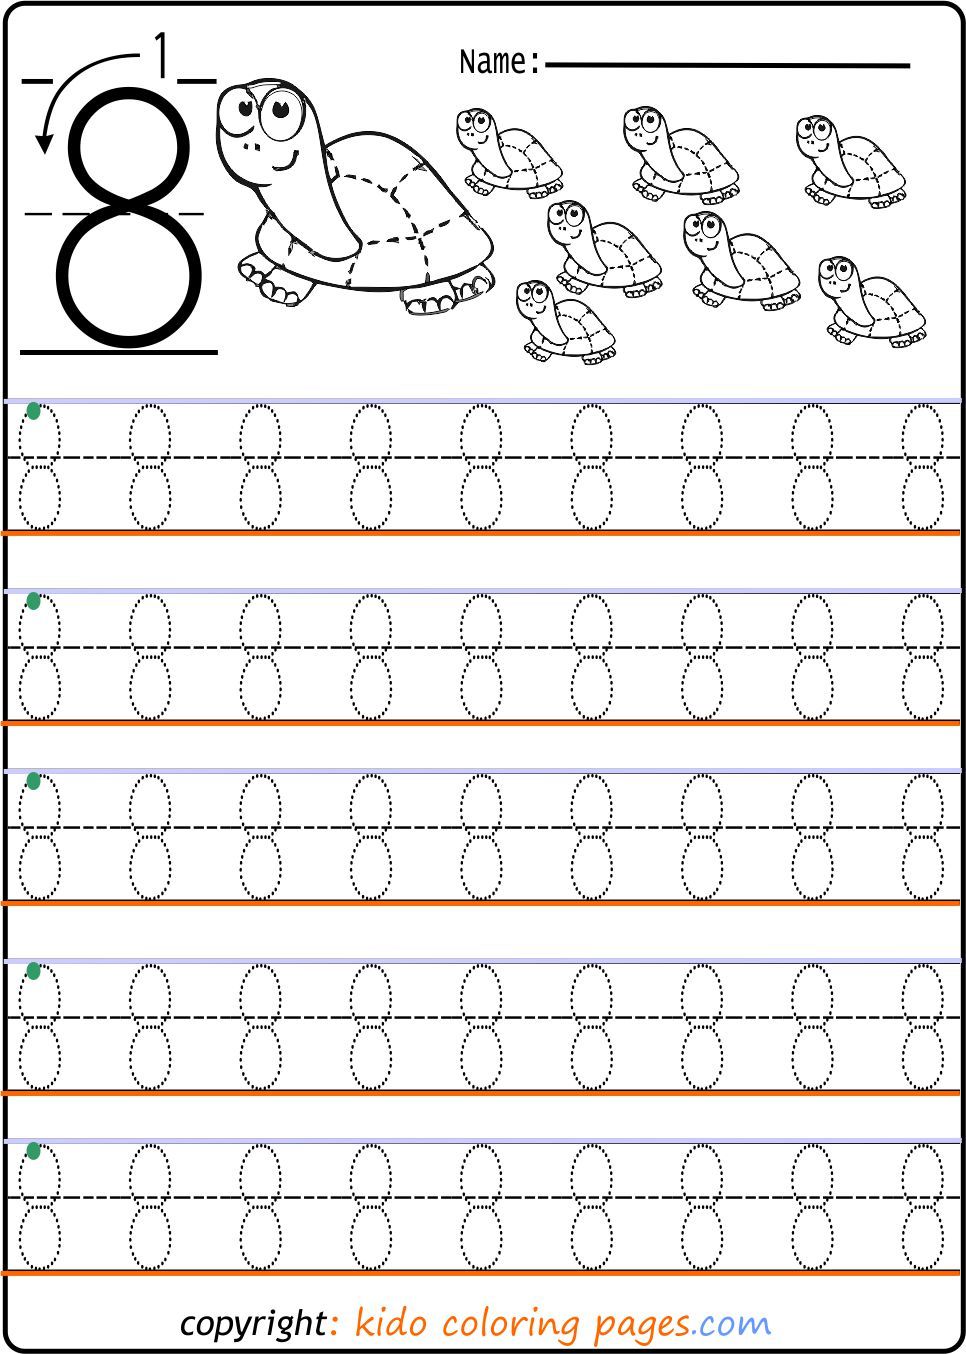 Number tracing worksheets archives